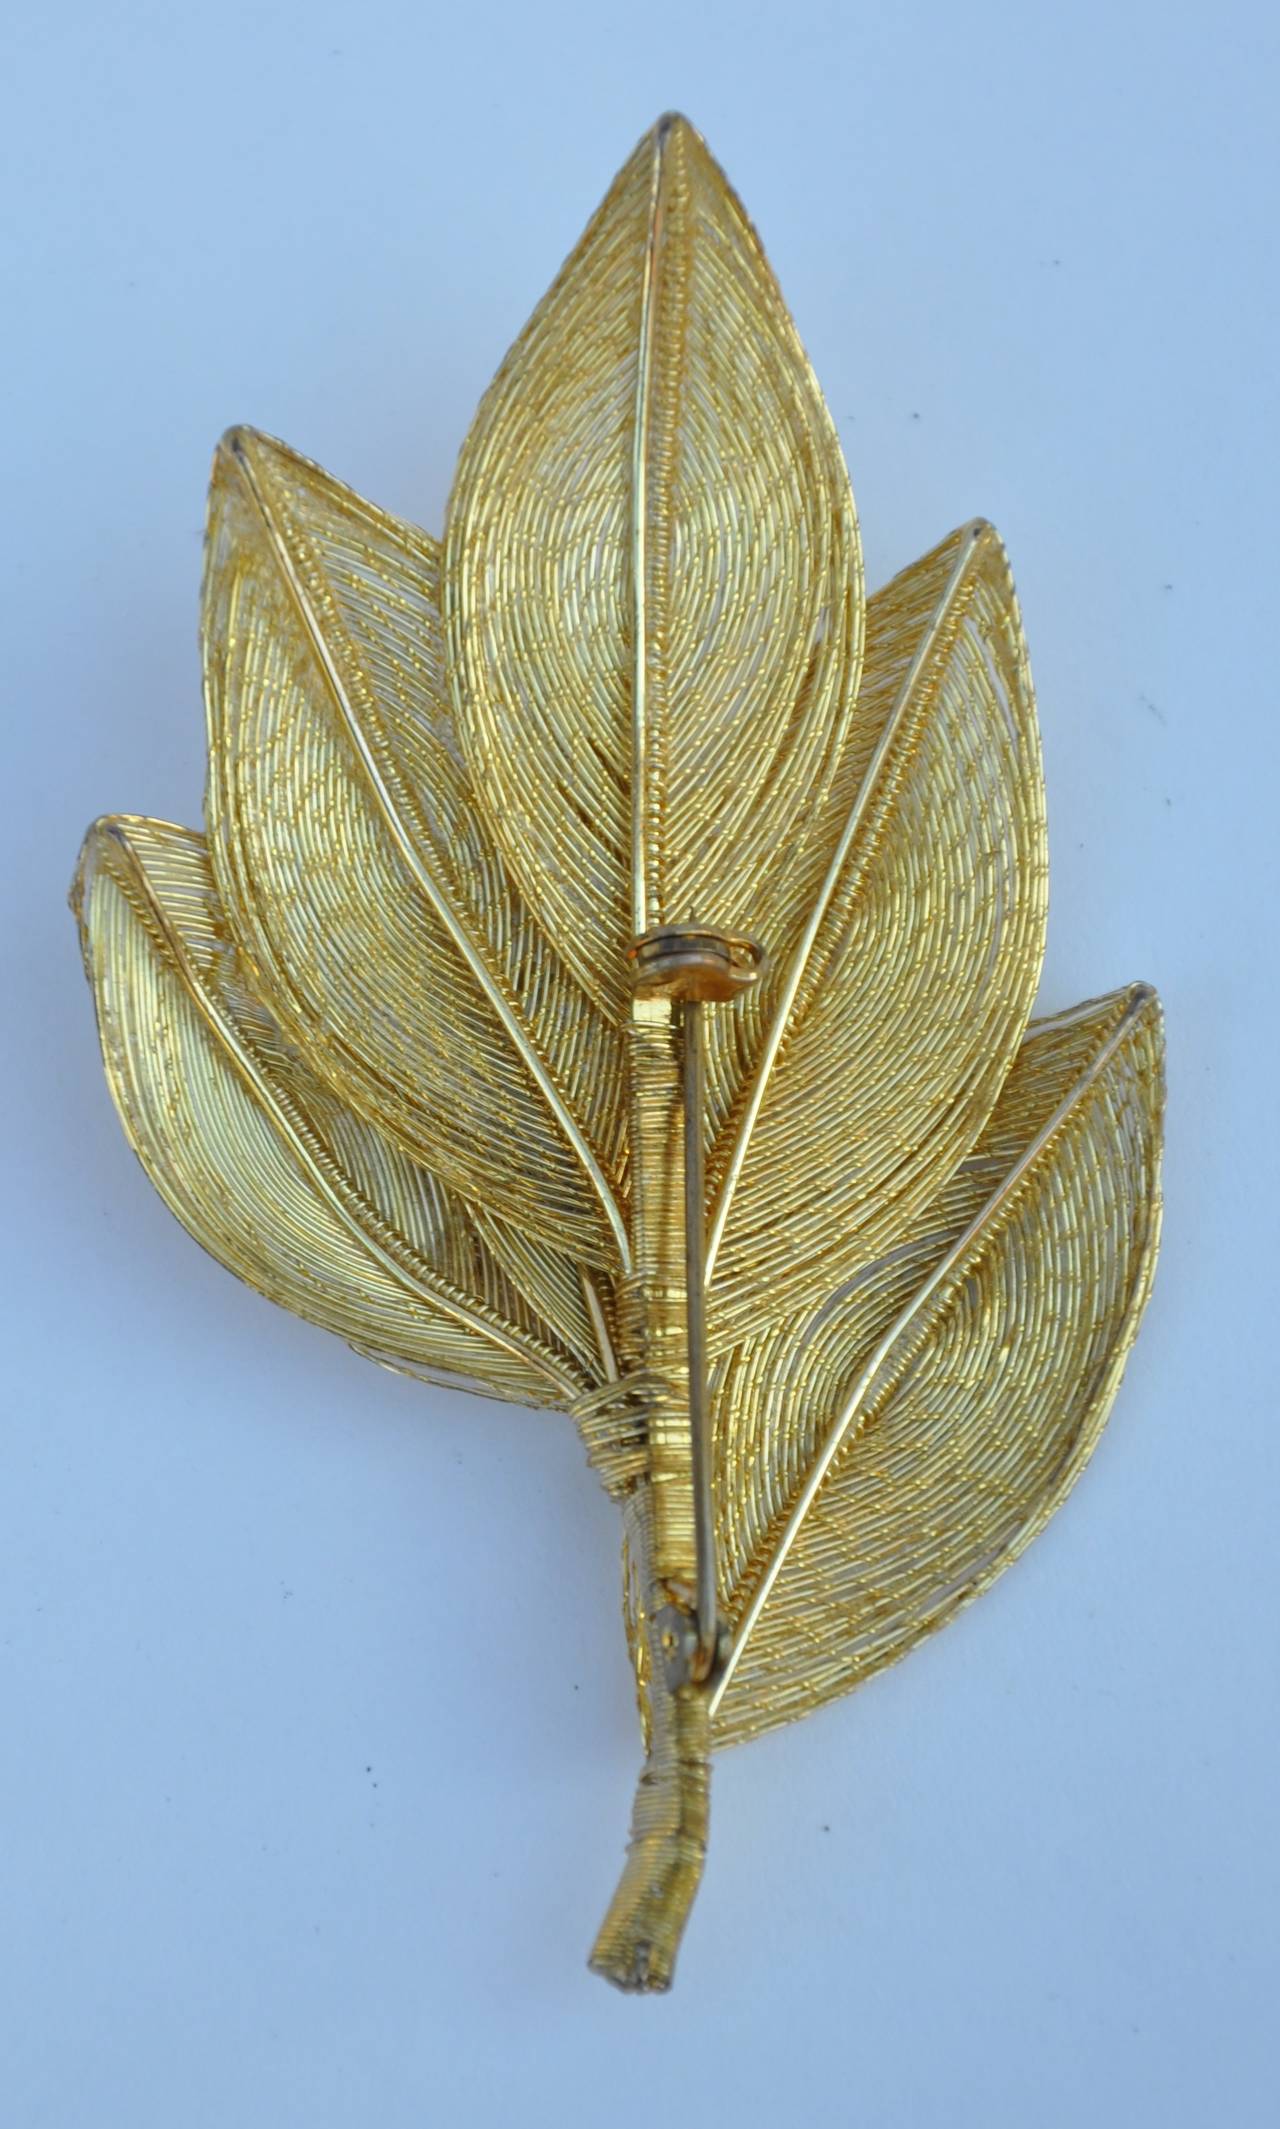 Large gilded gold filigree "Leaves" brooch are movable if desire. The length measures 3", height is 2", depth is 5/8".